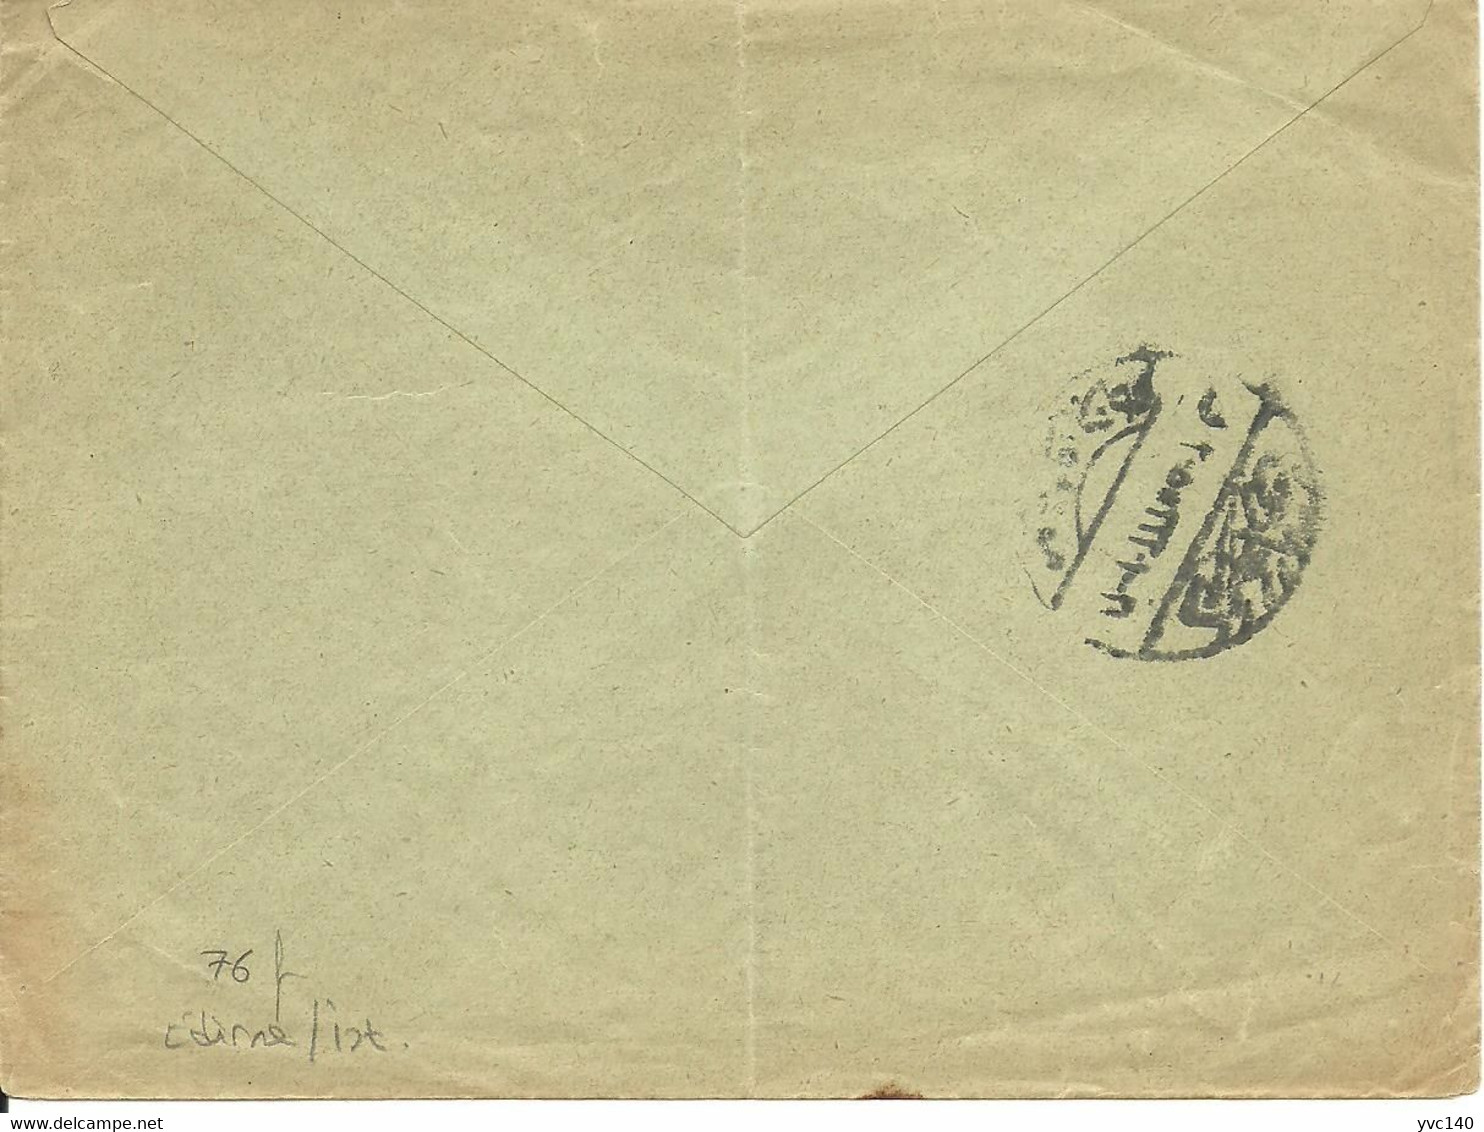 Turkey; 1905 Ottoman Postal Stationery Sent From Andrinople (Edirne) To Istanbul - Covers & Documents